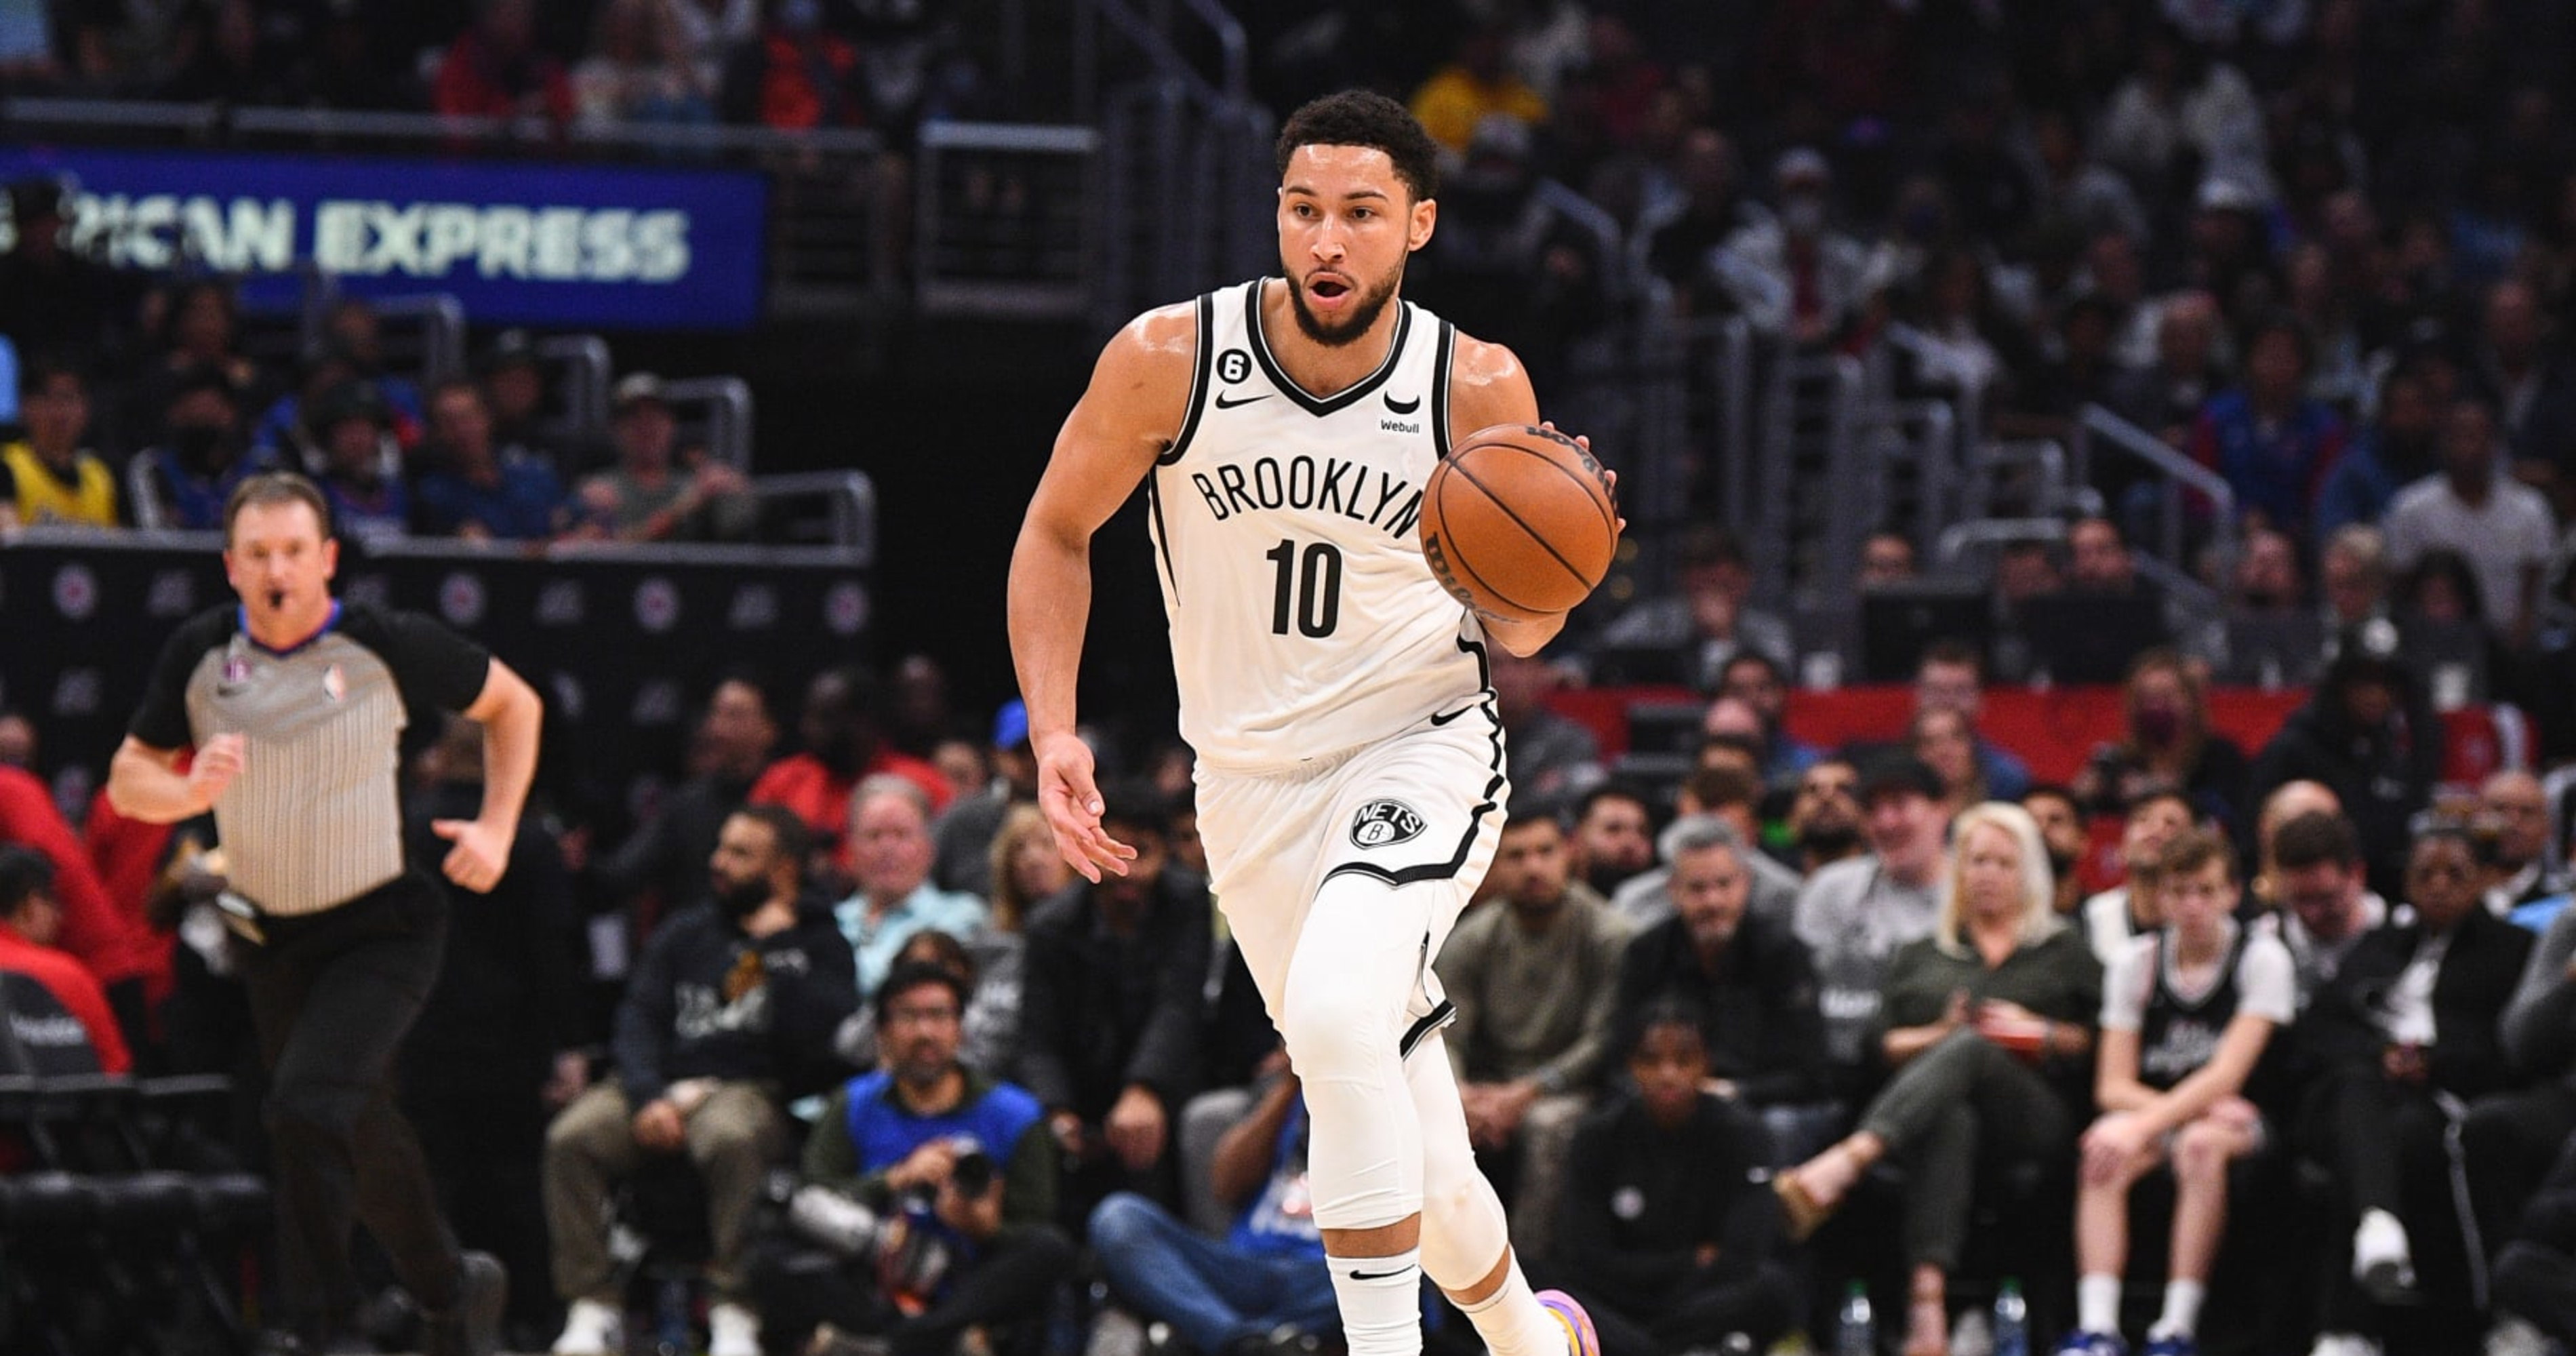 NBA Rumors: Ben Simmons' Availability, Level of Play Subject of Frustration with..